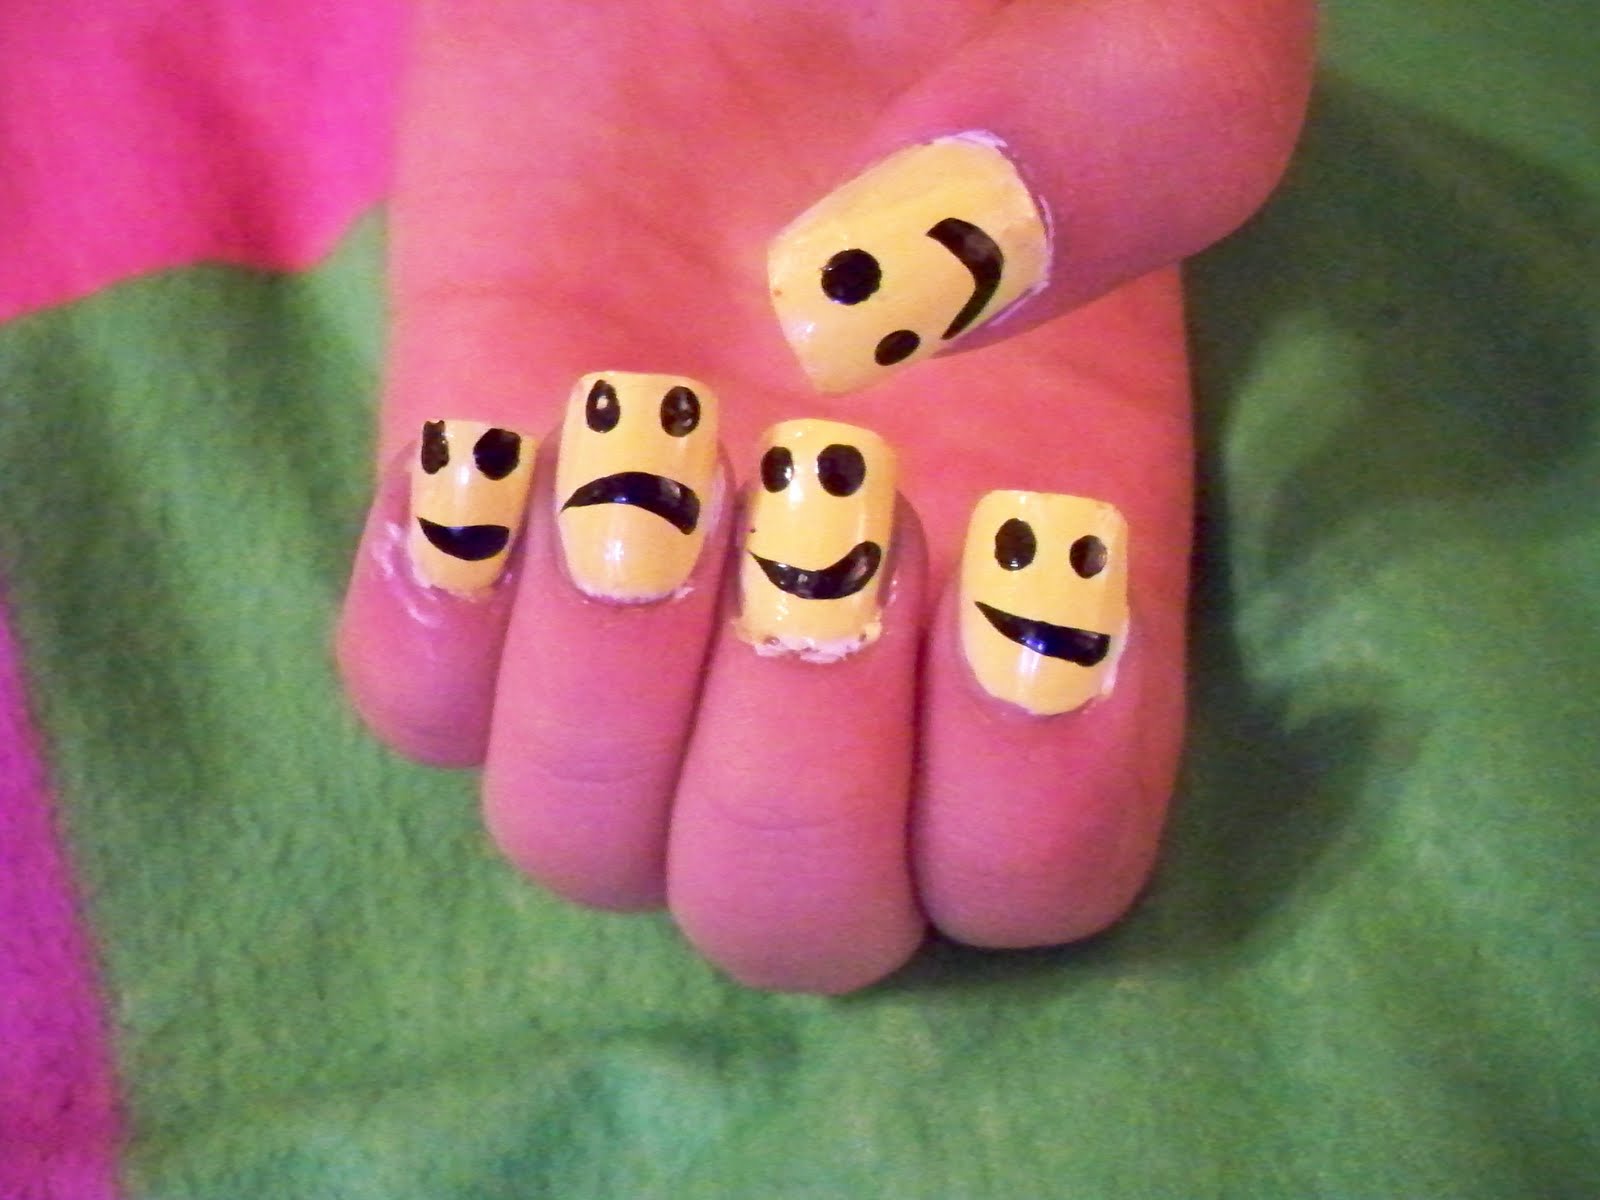 1. Melted Smiley Face Nail Art Tutorial - wide 7